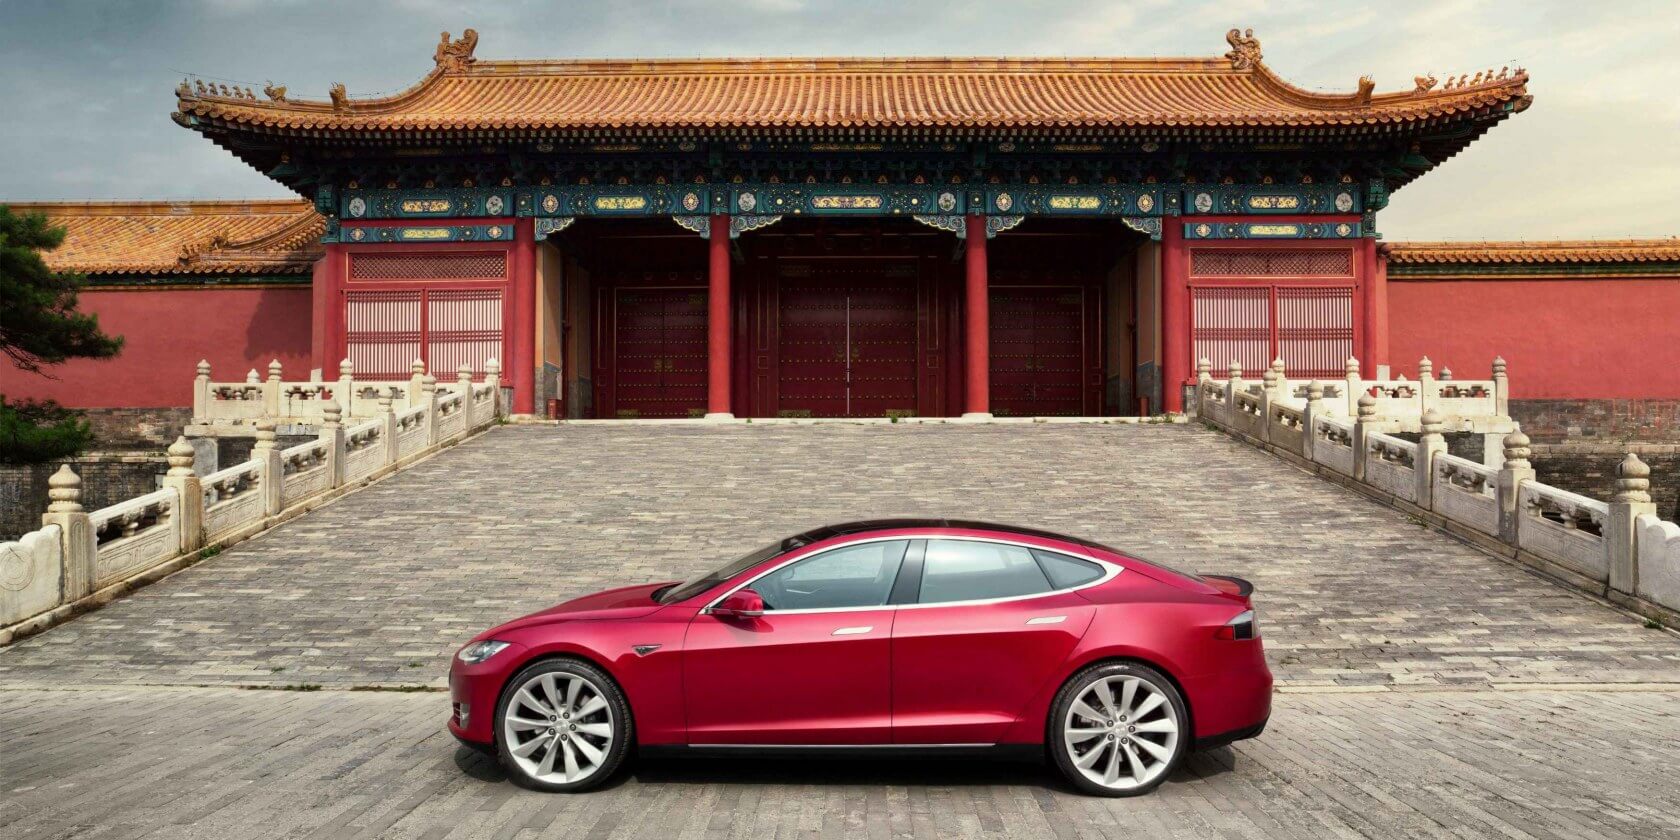 Tesla has reportedly closed a deal to buy 210 acres of land in Shanghai for a Gigafactory